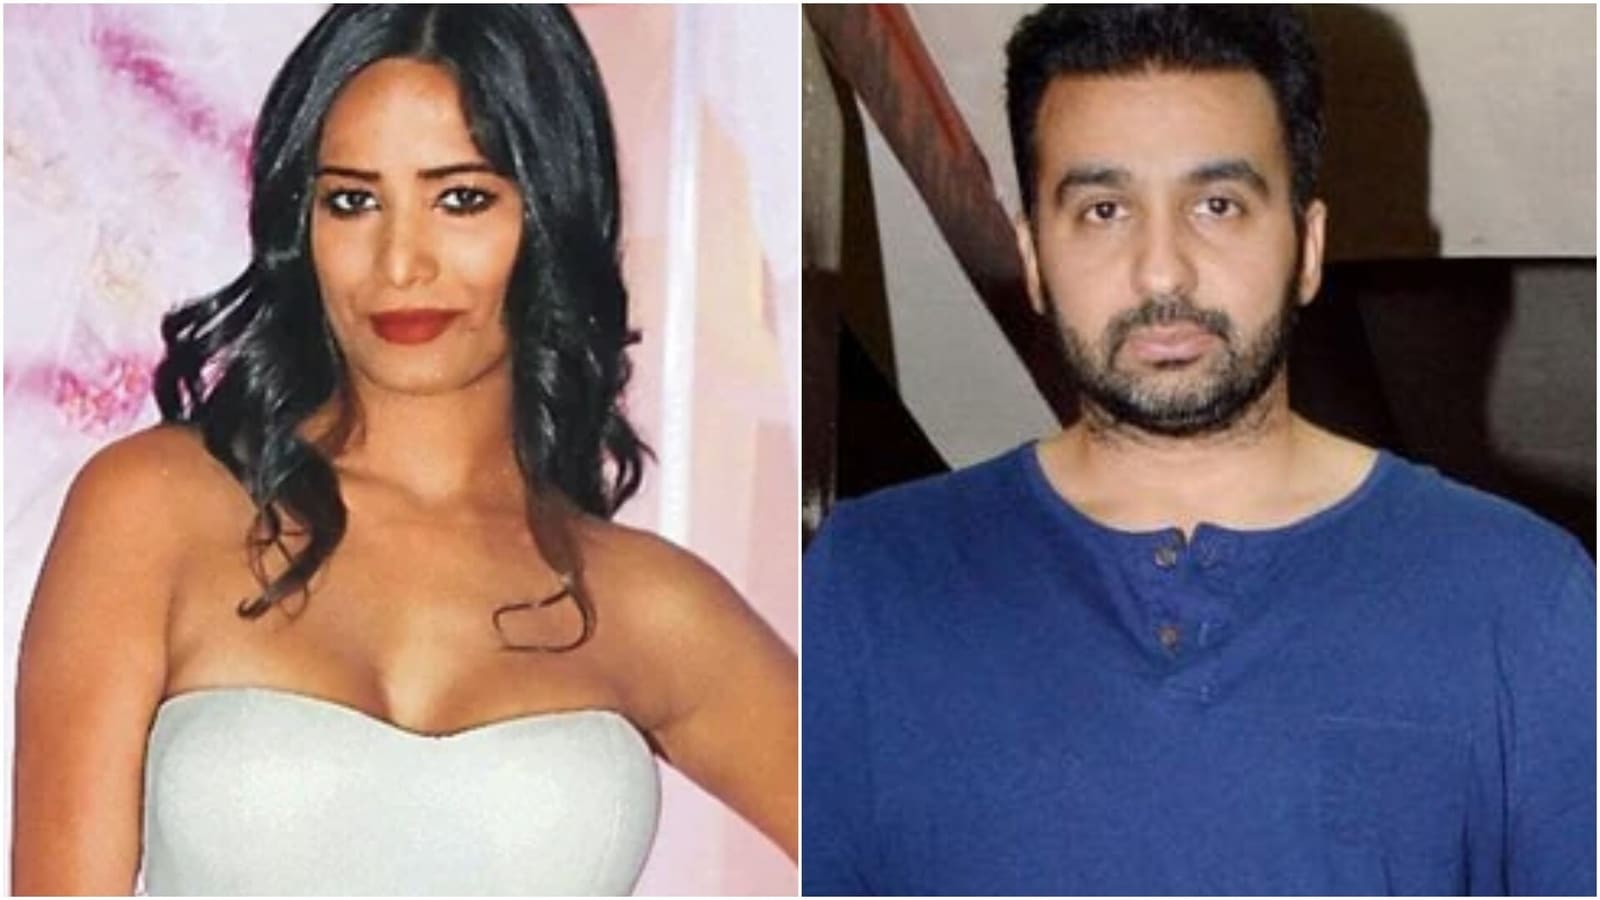 Ww Raj Wab Com With Blakemale - Poonam Pandey says working with Raj Kundra was the 'biggest mistake' of her  life: 'These guys cheat people' | Bollywood - Hindustan Times